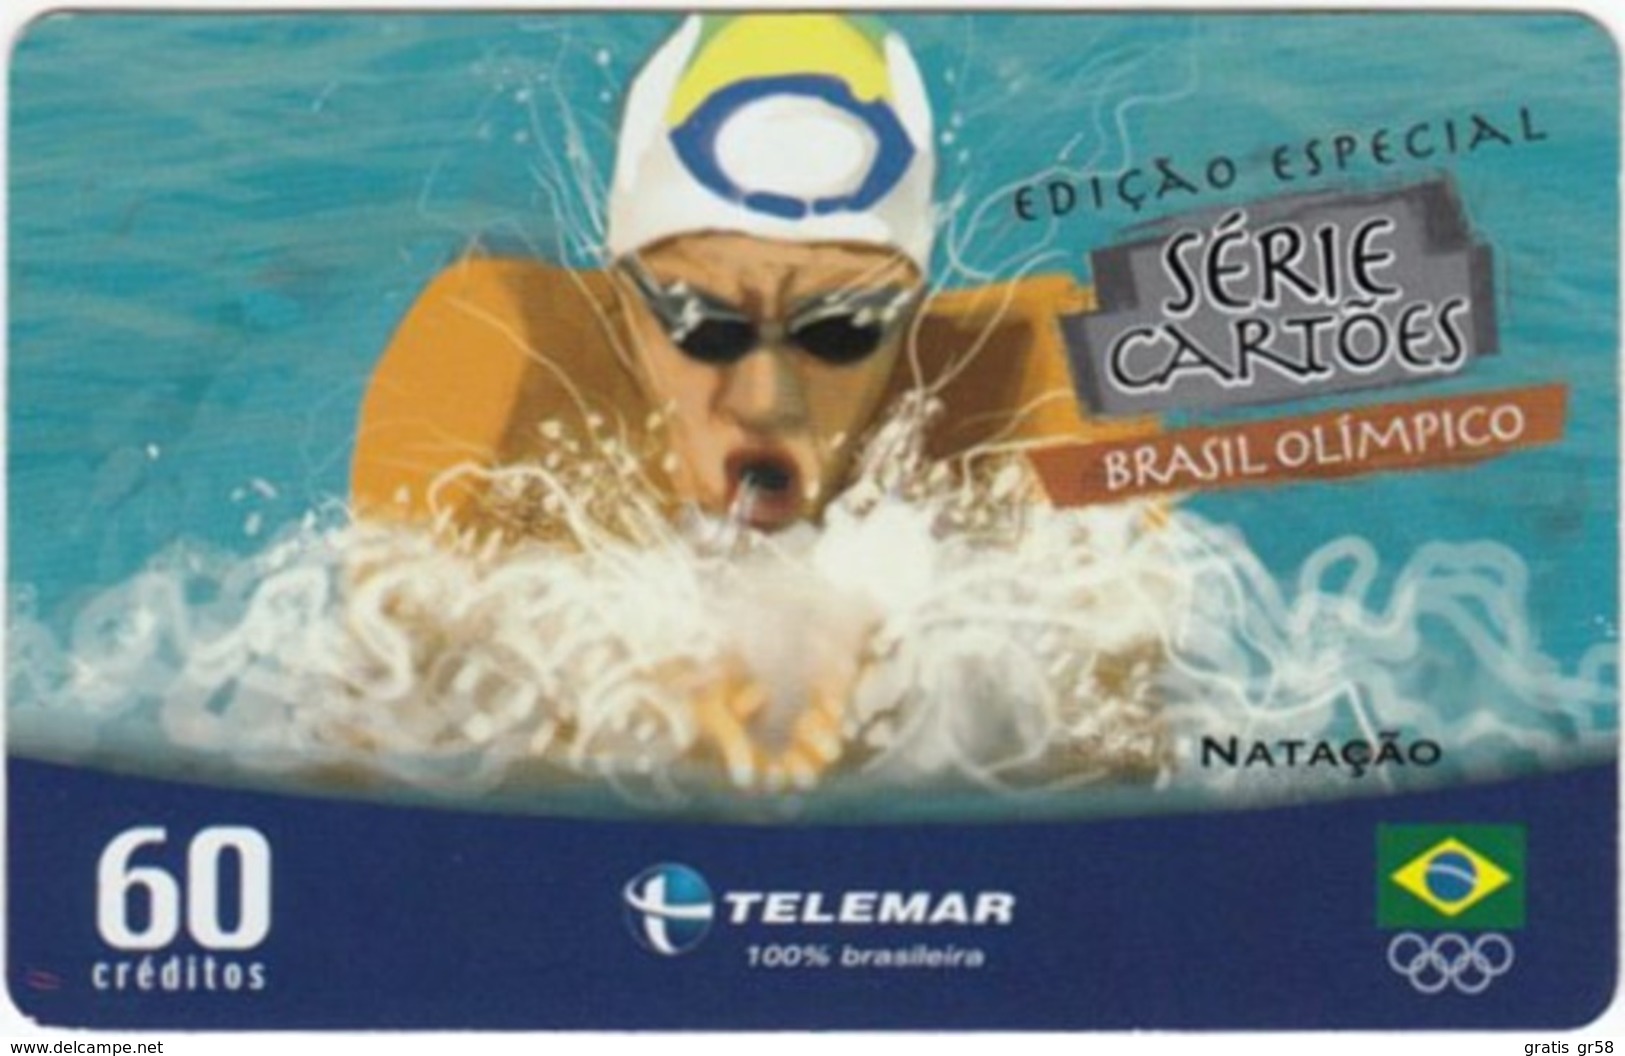 Brazil - BR-TLM-MG-2013, 08/34 - 0150, Event, Swimming, 60U, 30,960ex, 4/04, Used - Jeux Olympiques